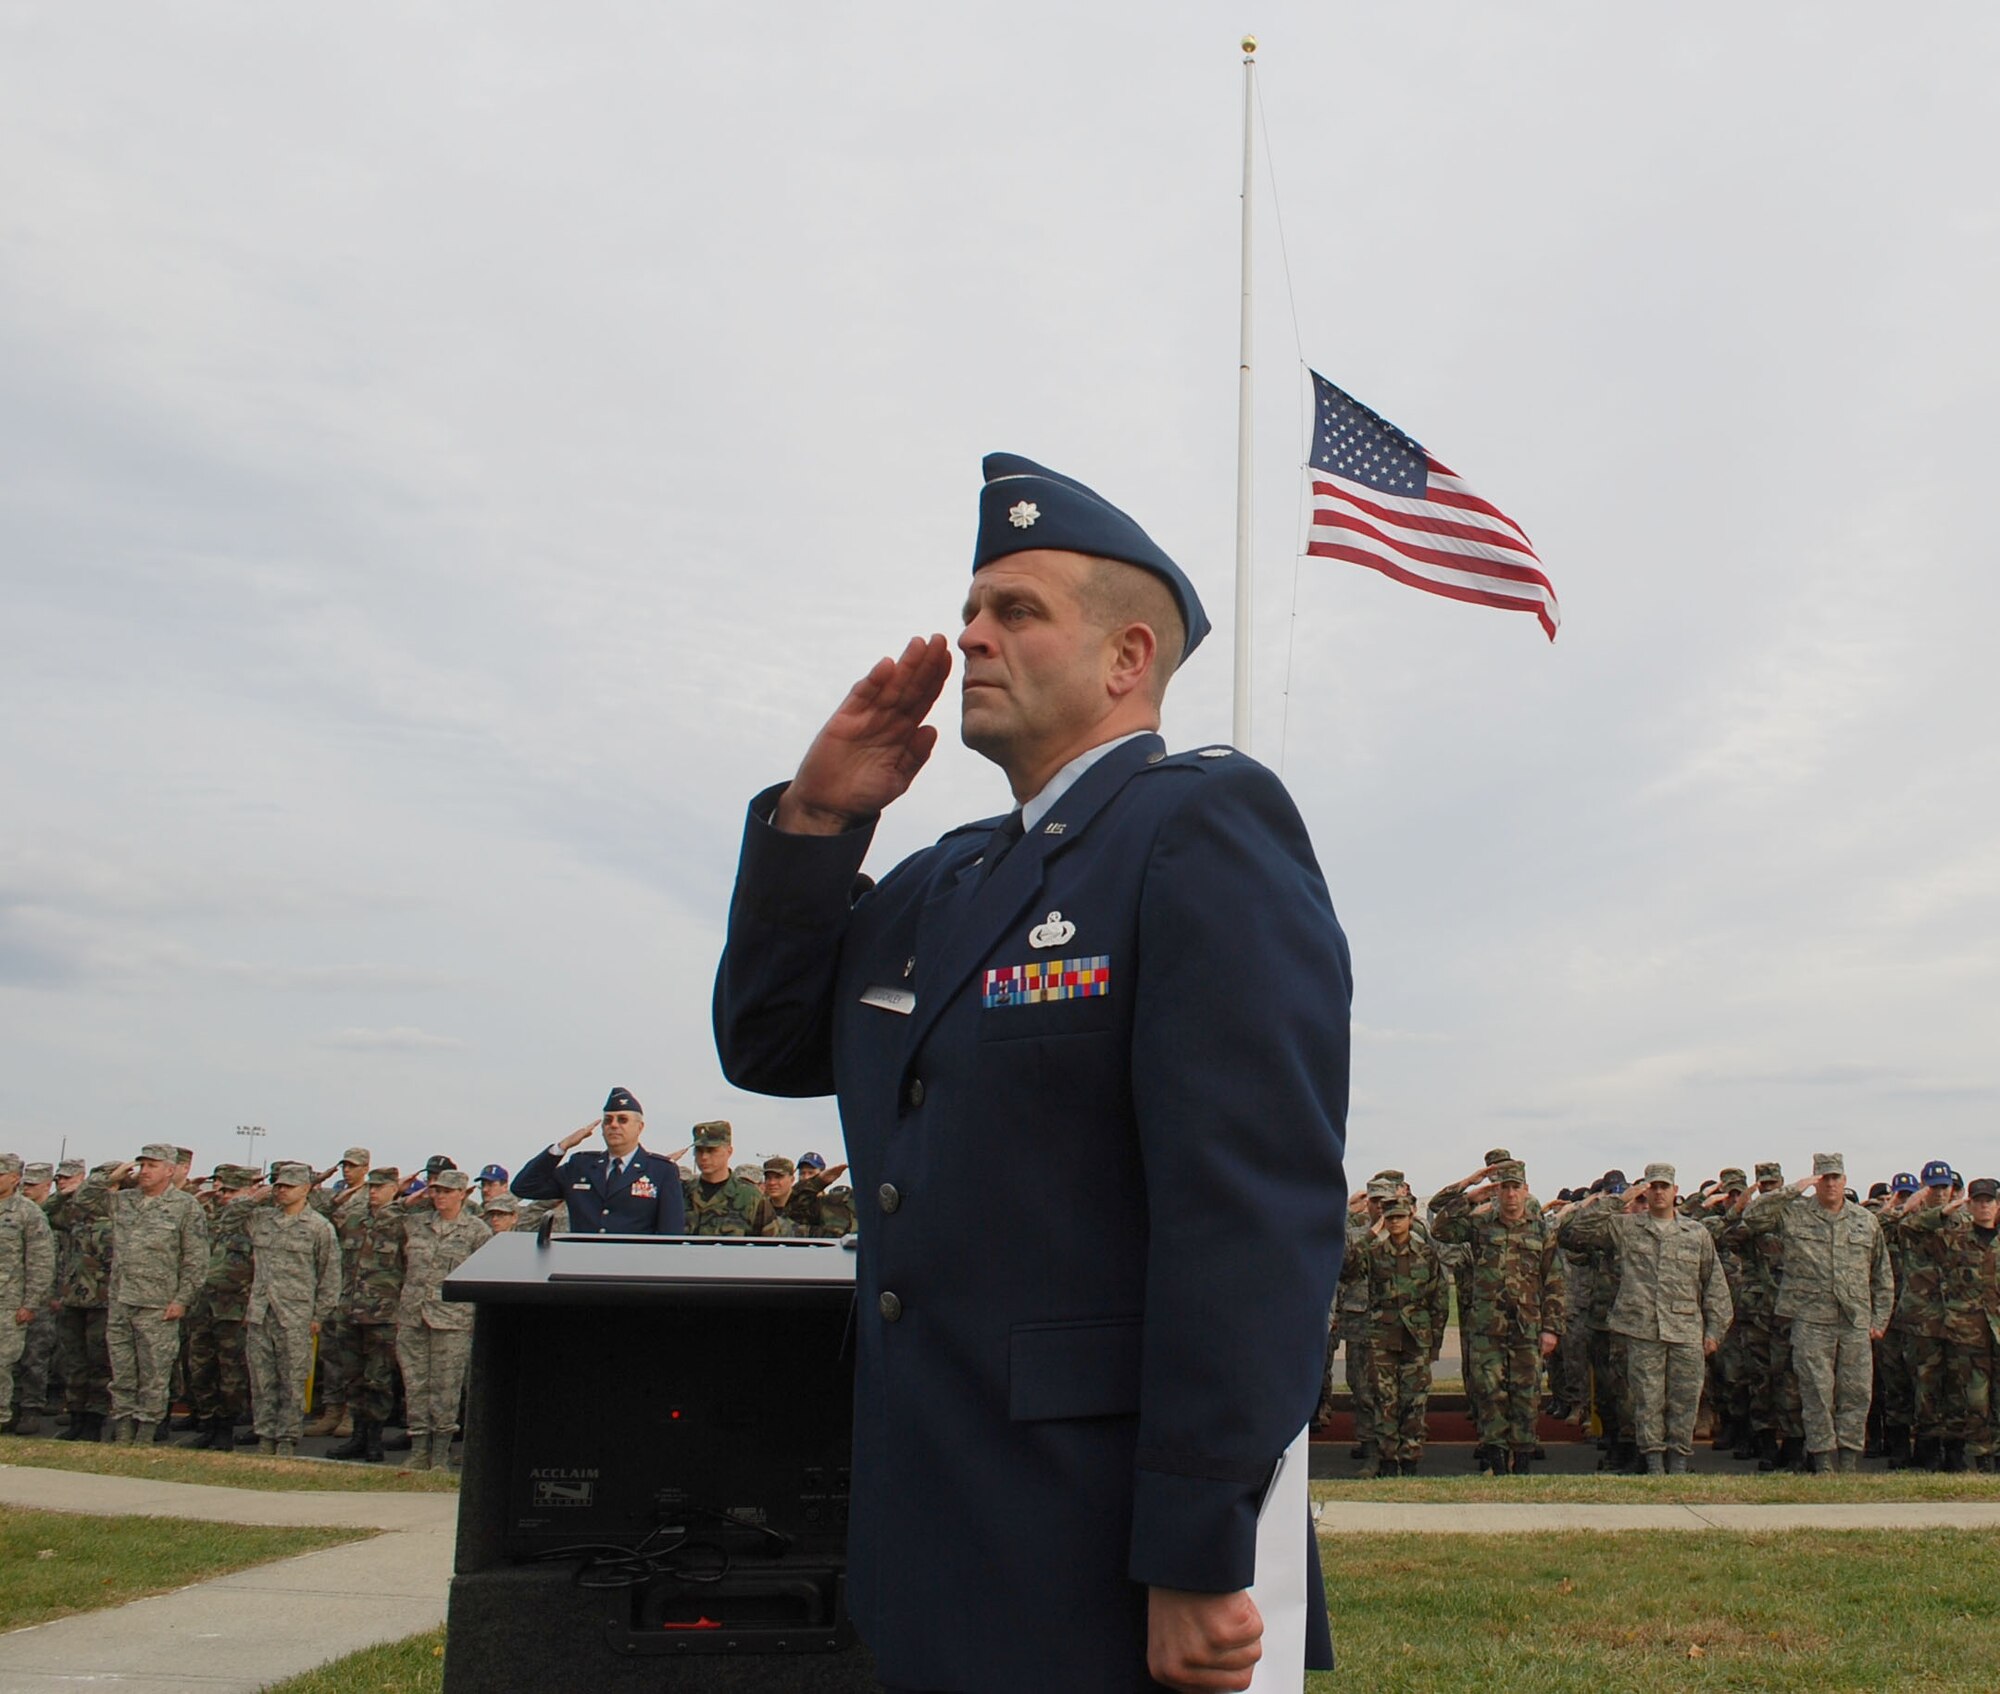 Lt. Col. Richard Cockley salutes during the 439th Airlift Wing?s annual retreat ceremony held at the Base Ellipse Nov. 1. Colonel Cockley is commander of the 58th Aerial Port Squadron and earned the Bronze Star for his service while deployed in Afghanistan from January to May. The retreat cermony also included the playing of Taps and honors all of the nation?s veterans. (photo by Tech. Sgt. Andrew Biscoe)